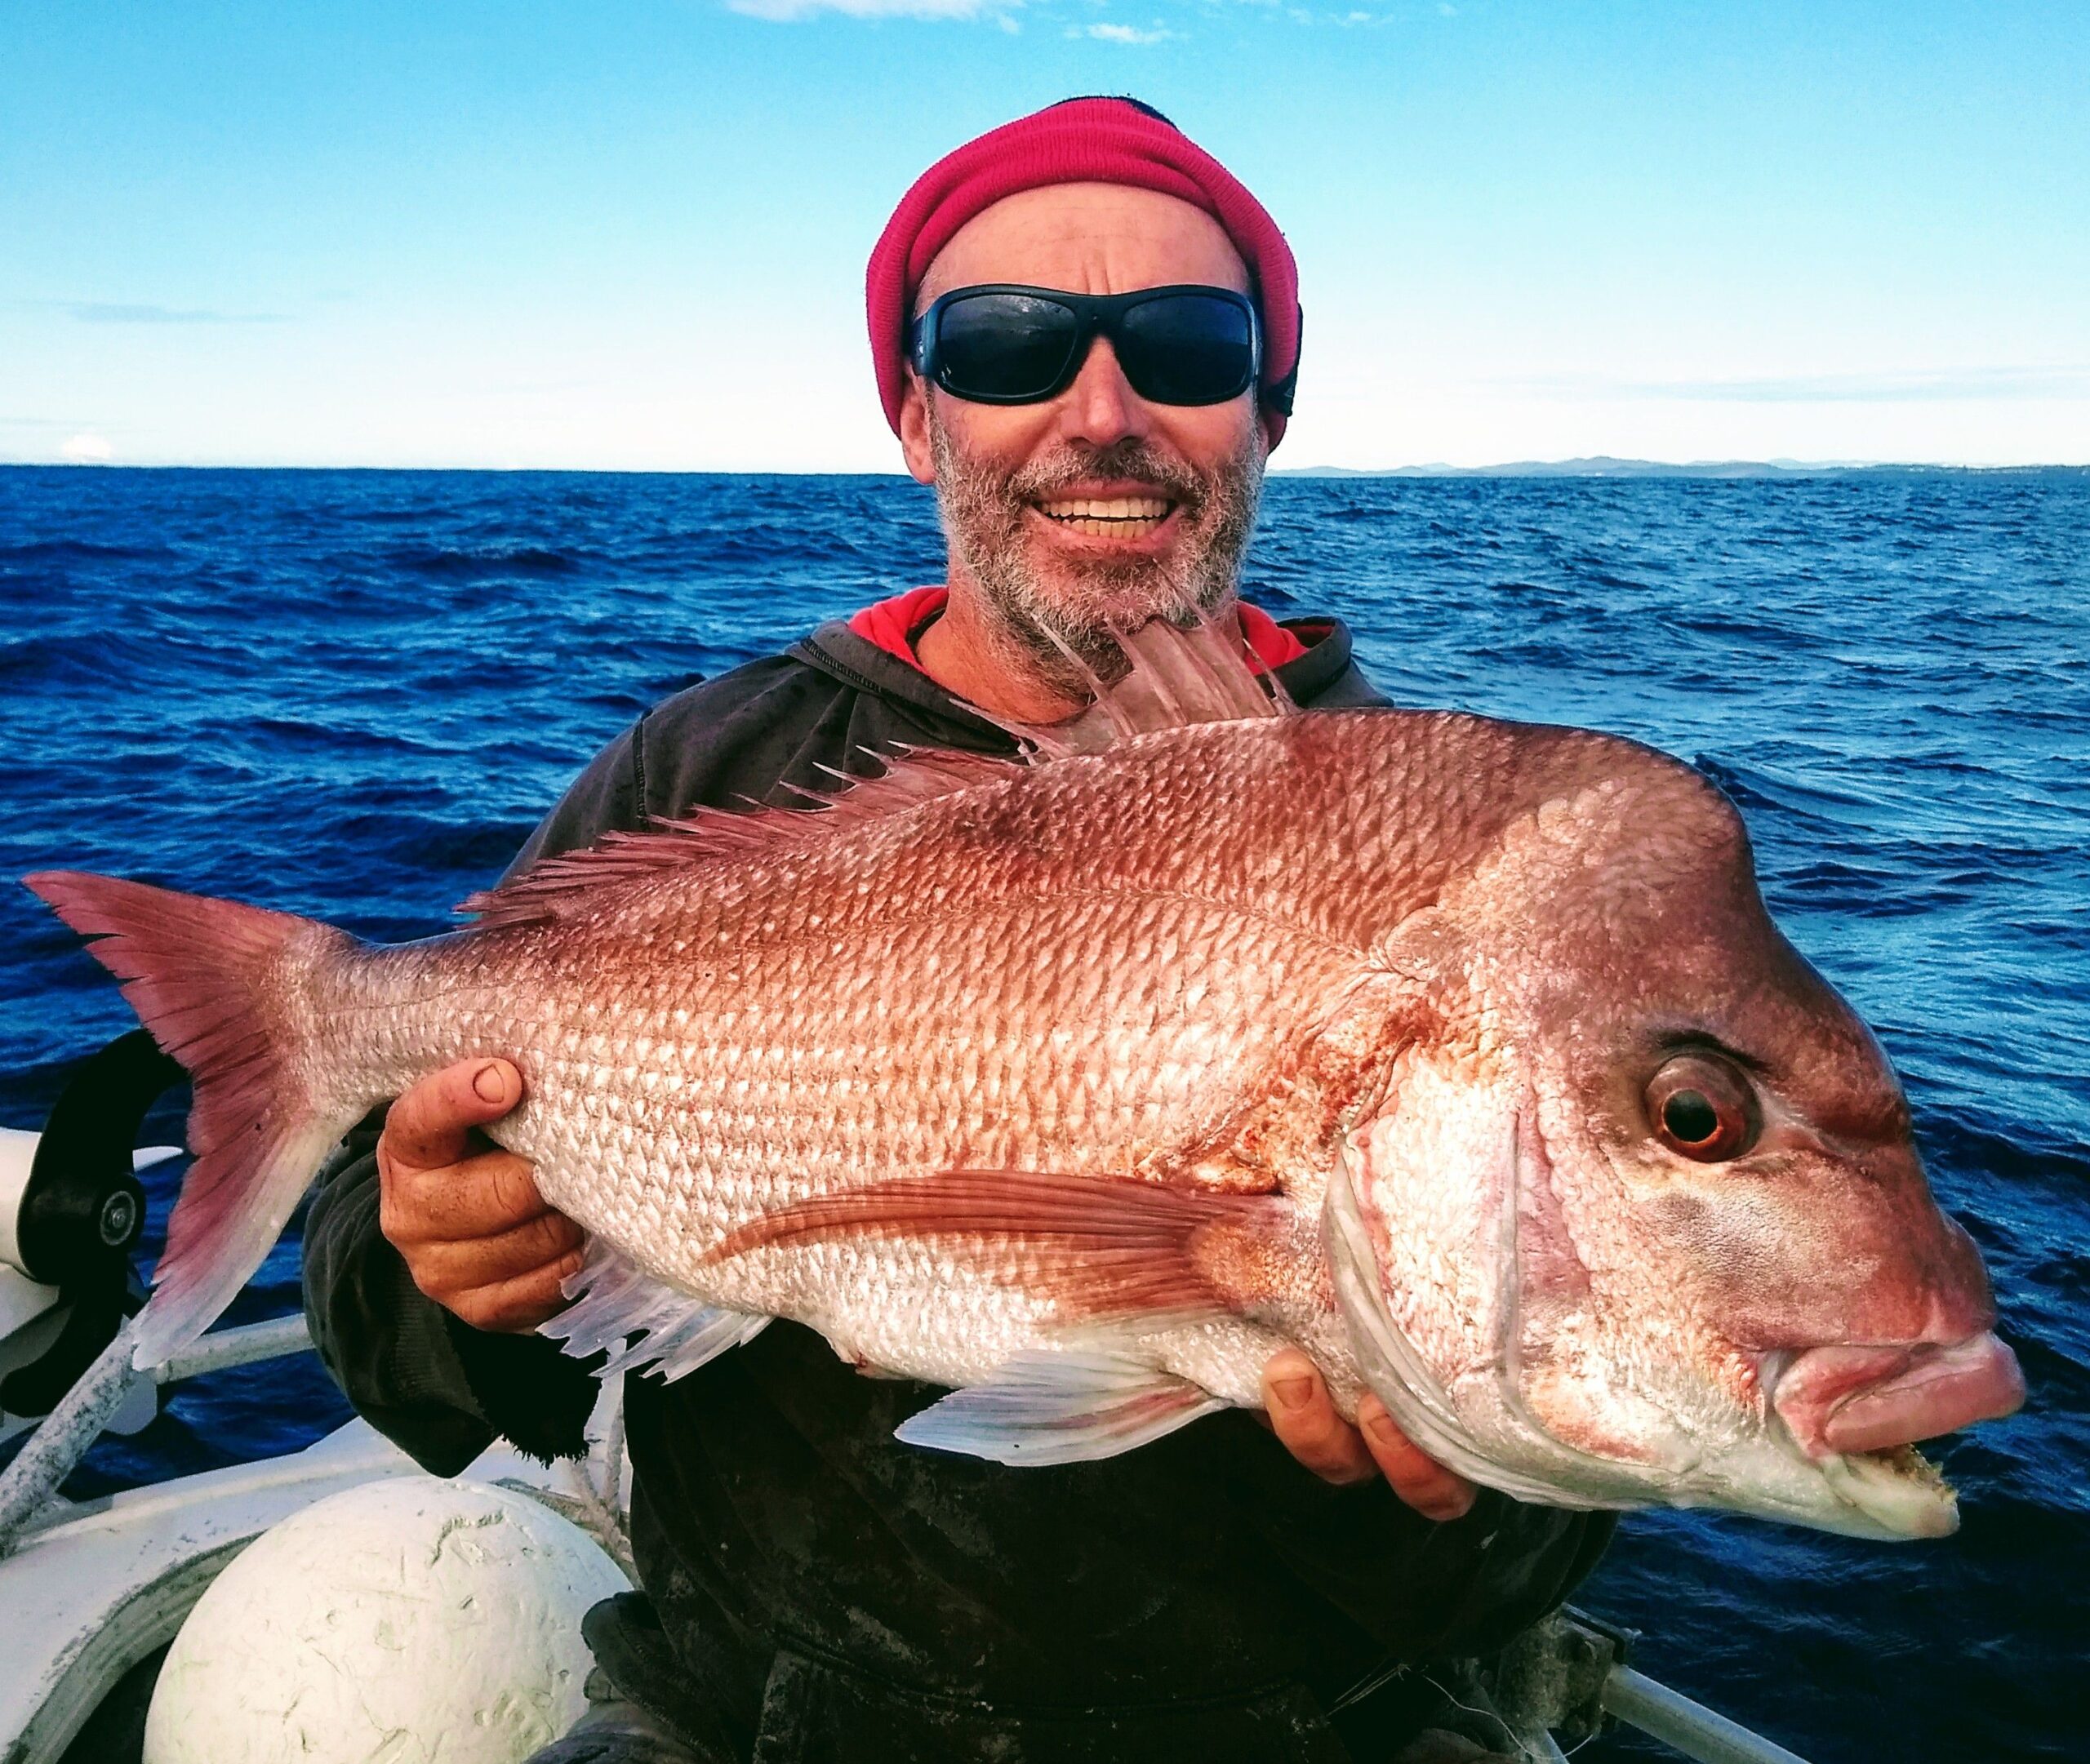 Scott Kempton was all smiles with this quality Snapper scaled